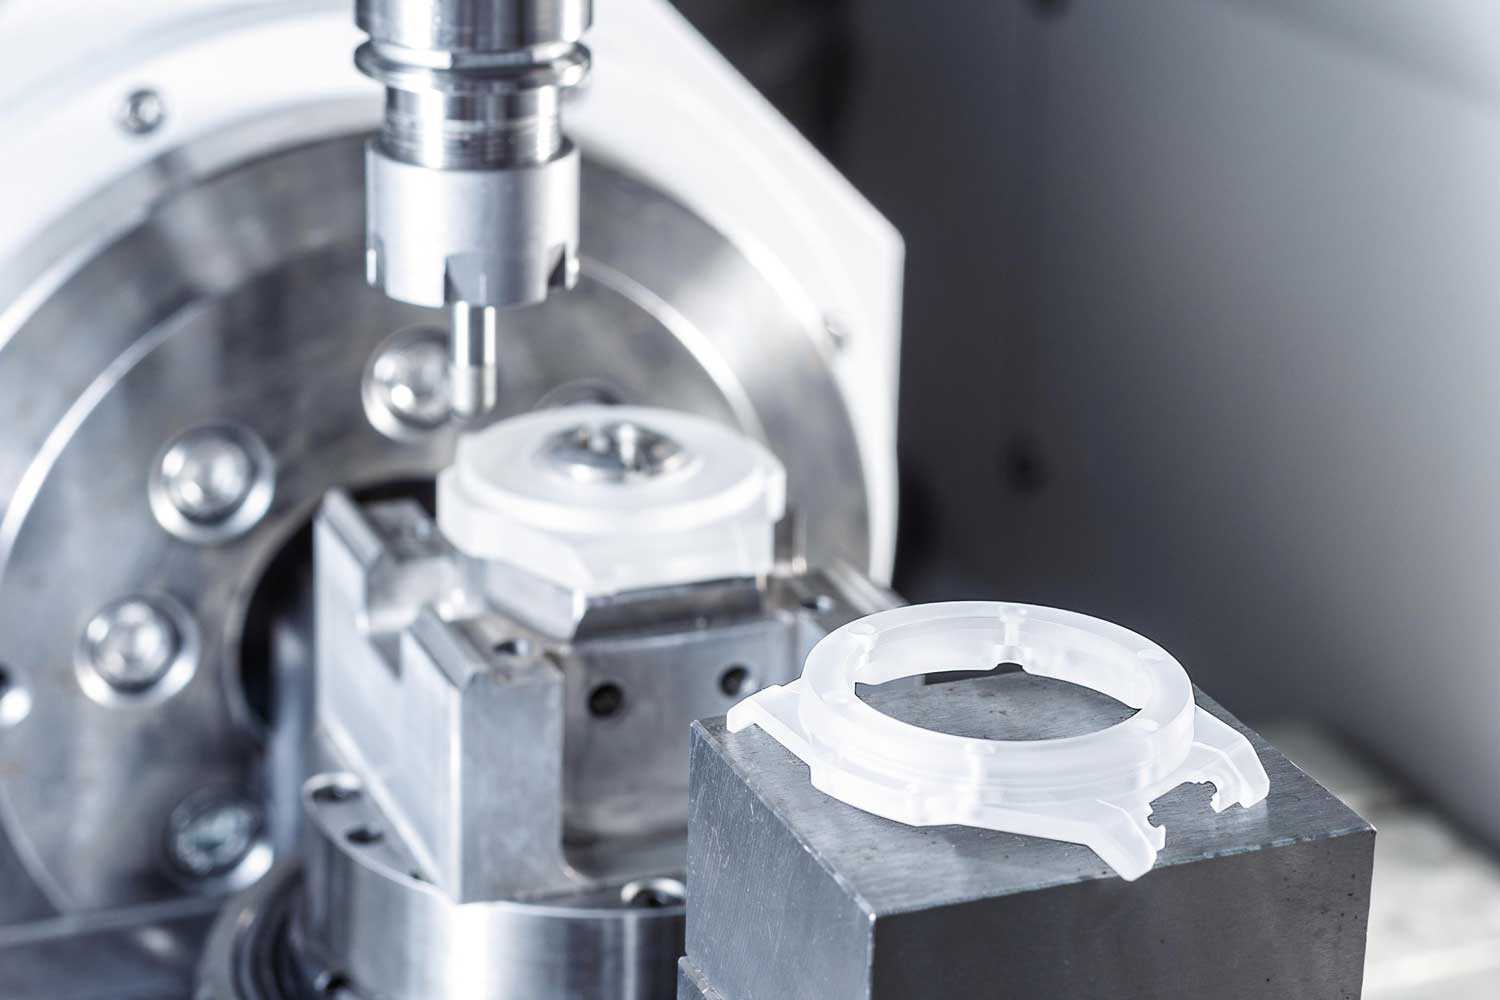 The machining of sapphire crystal cases is a time-consuming process